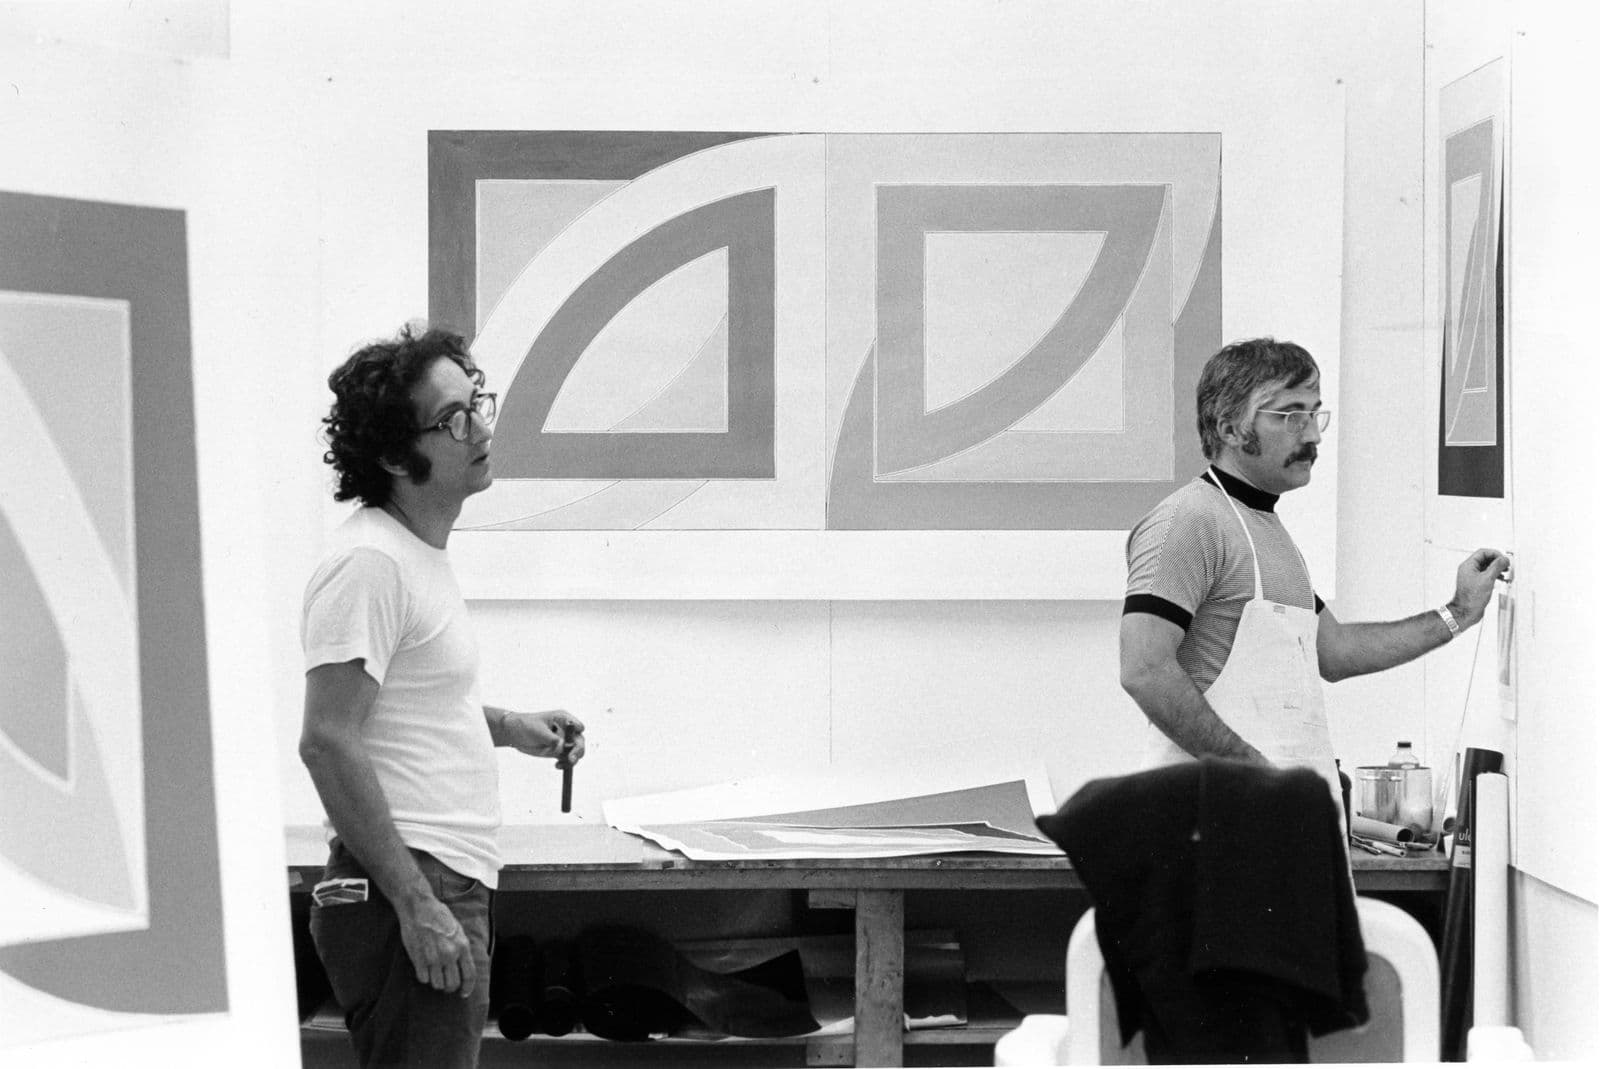 Two men looking at art work on a wall